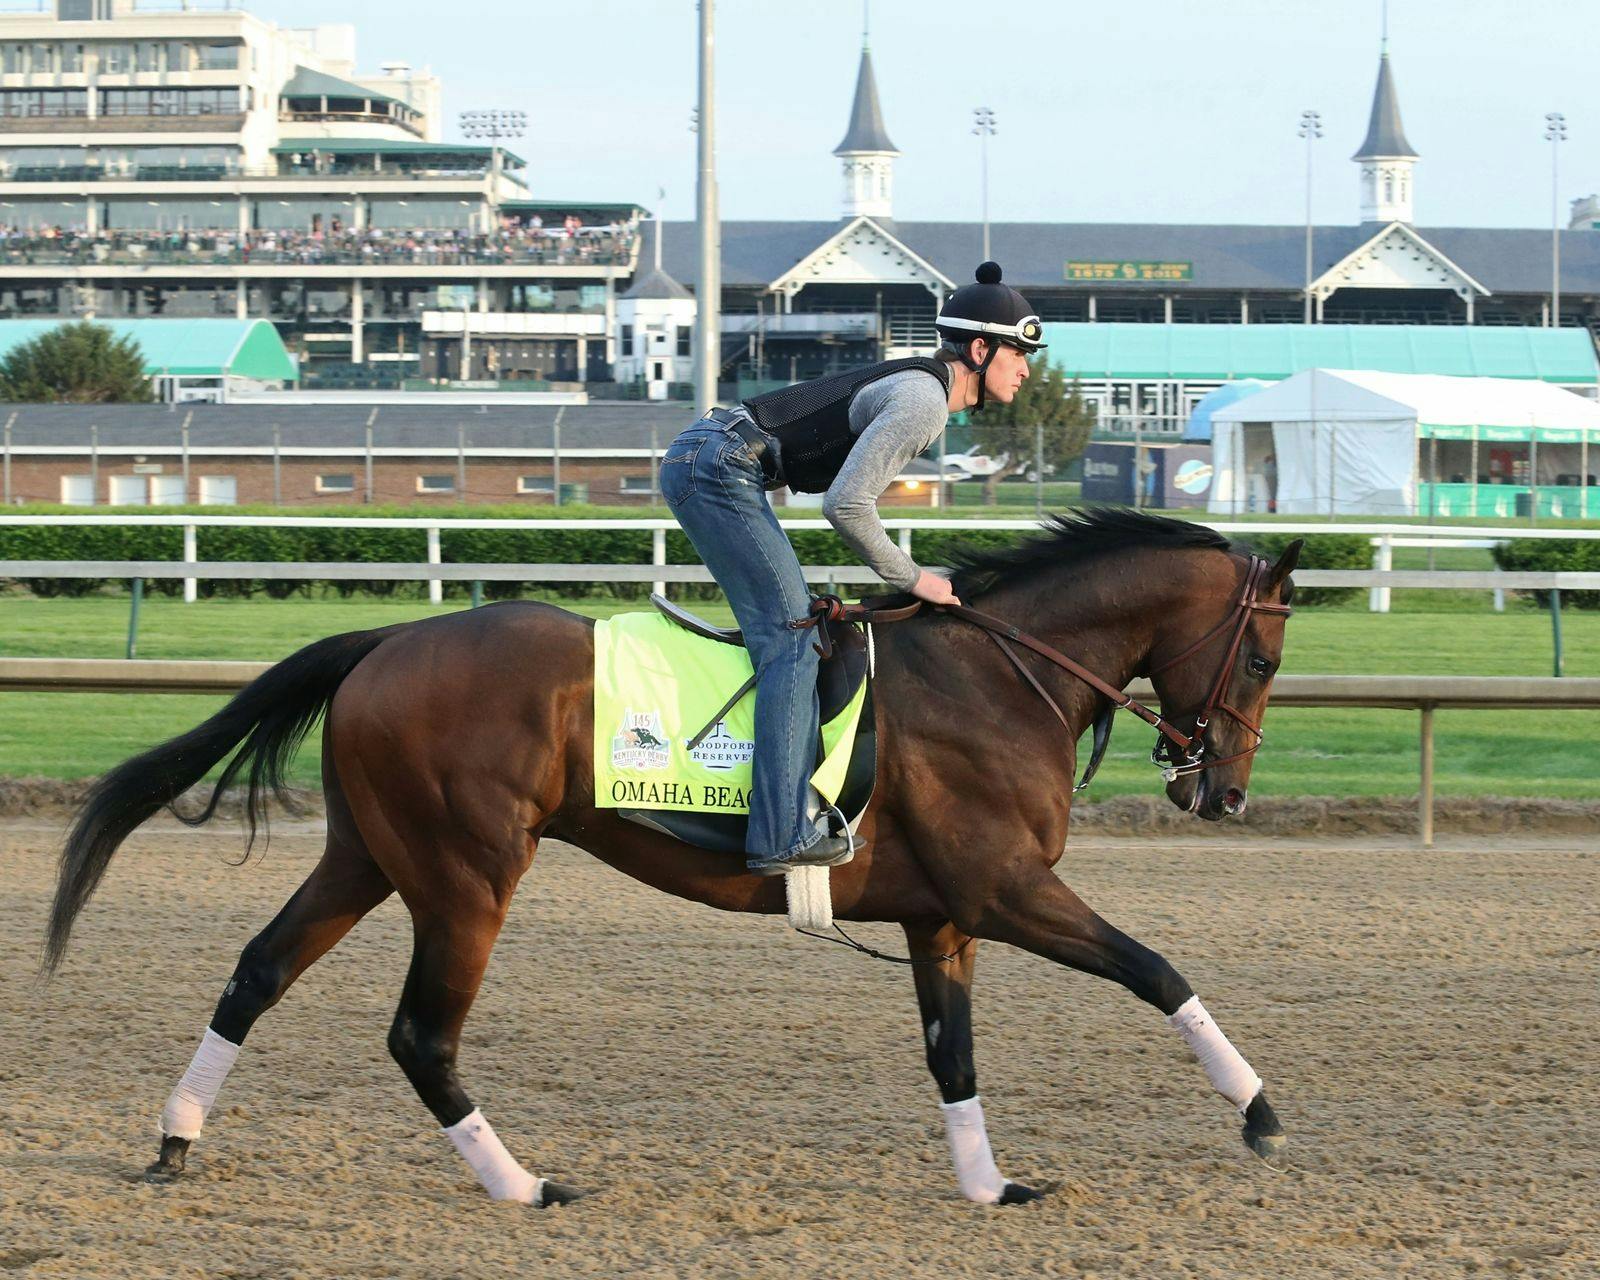 Kentucky Derby scratches that changed history TwinSpires